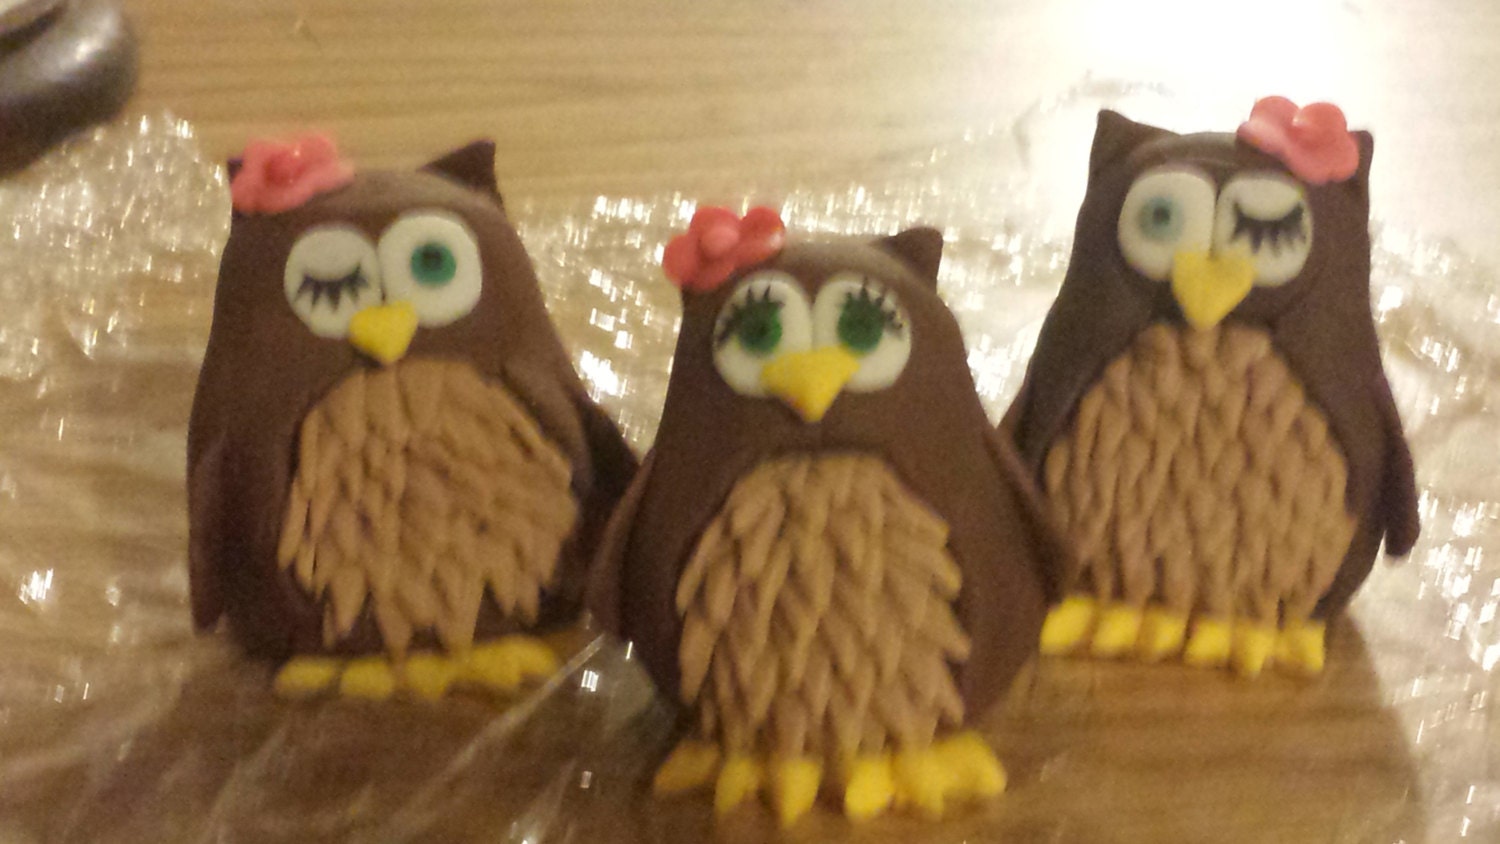 edible owl cake toppers made of gumpaste, weddings, baby showers, birthday cakes, party favors - MommyandMeWorkshop